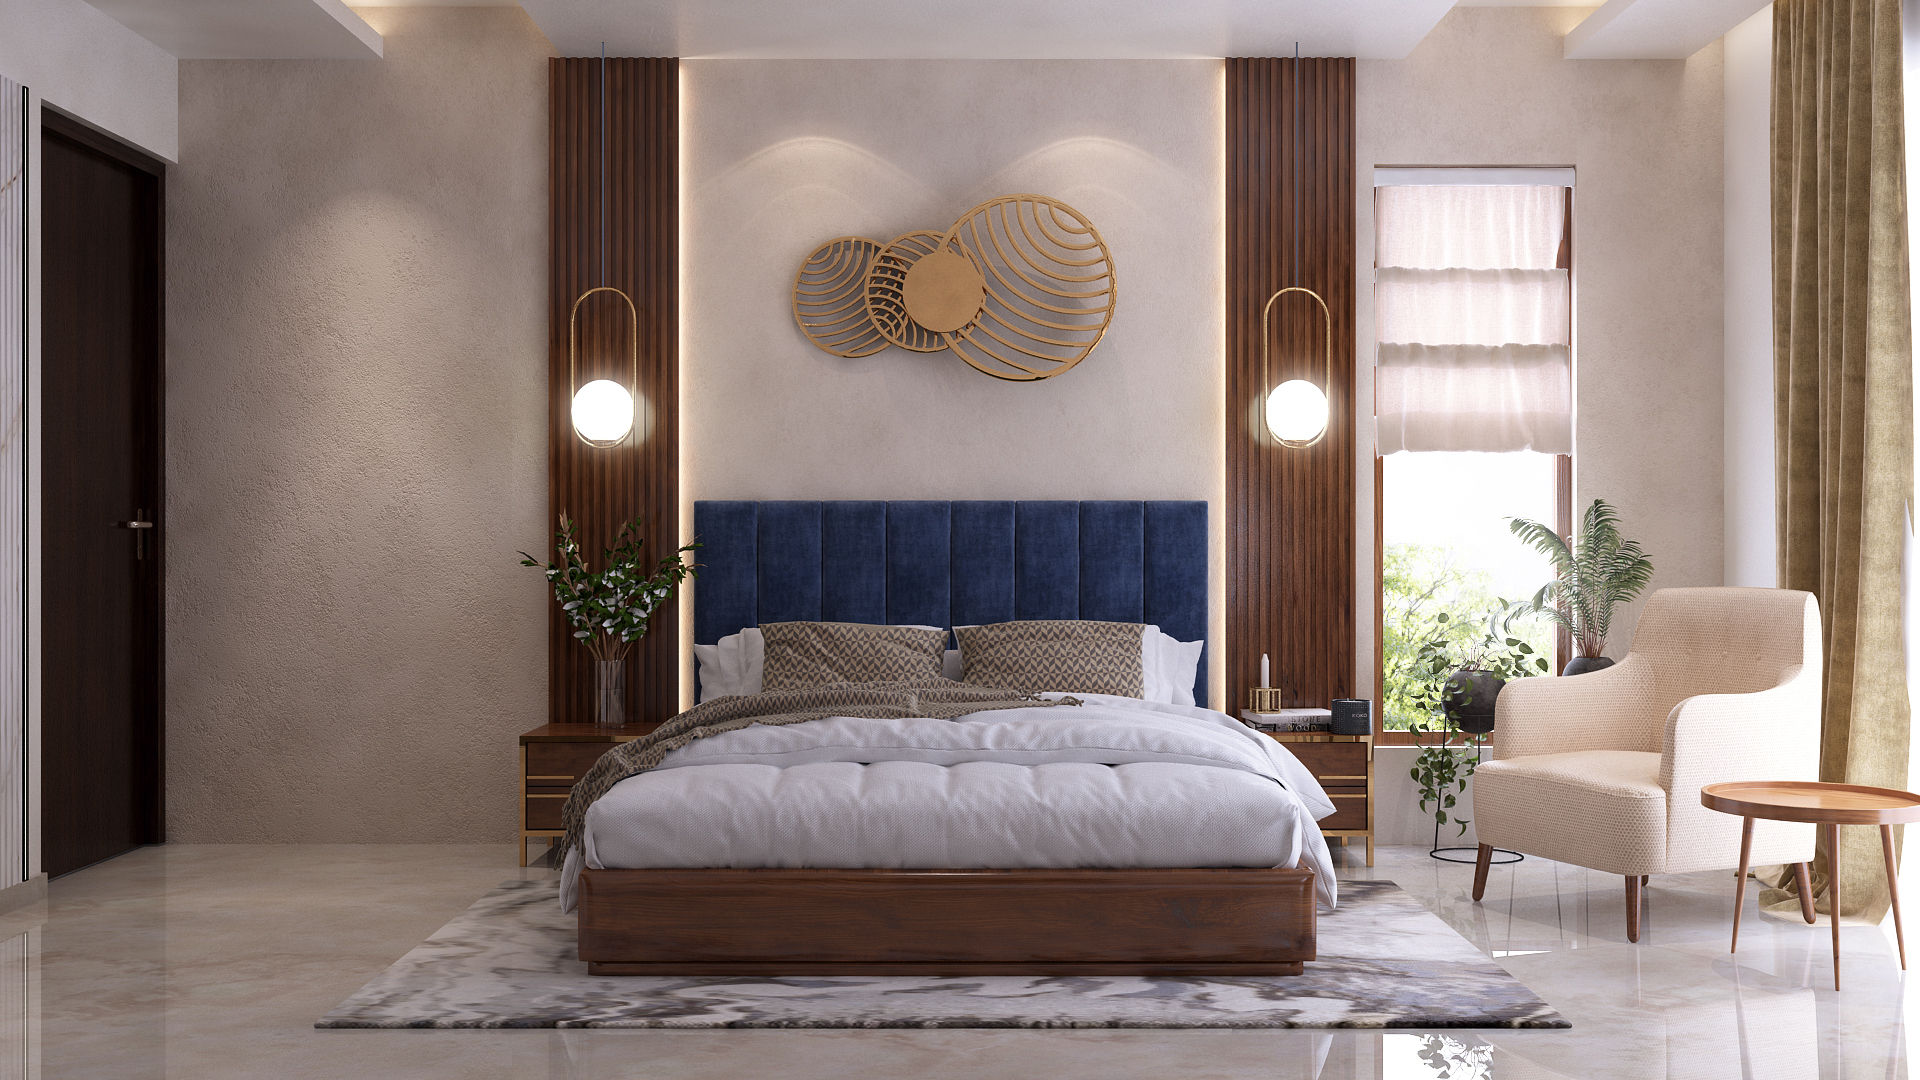 Parent's room designed with wooden slats theme and stylish pendants homify Eclectic style bedroom interior designer in delhi, interior designer in Gurgaon, Interior designer in Noida, bedroom interior designs, bedroom wall designs, home interior designer in delhi